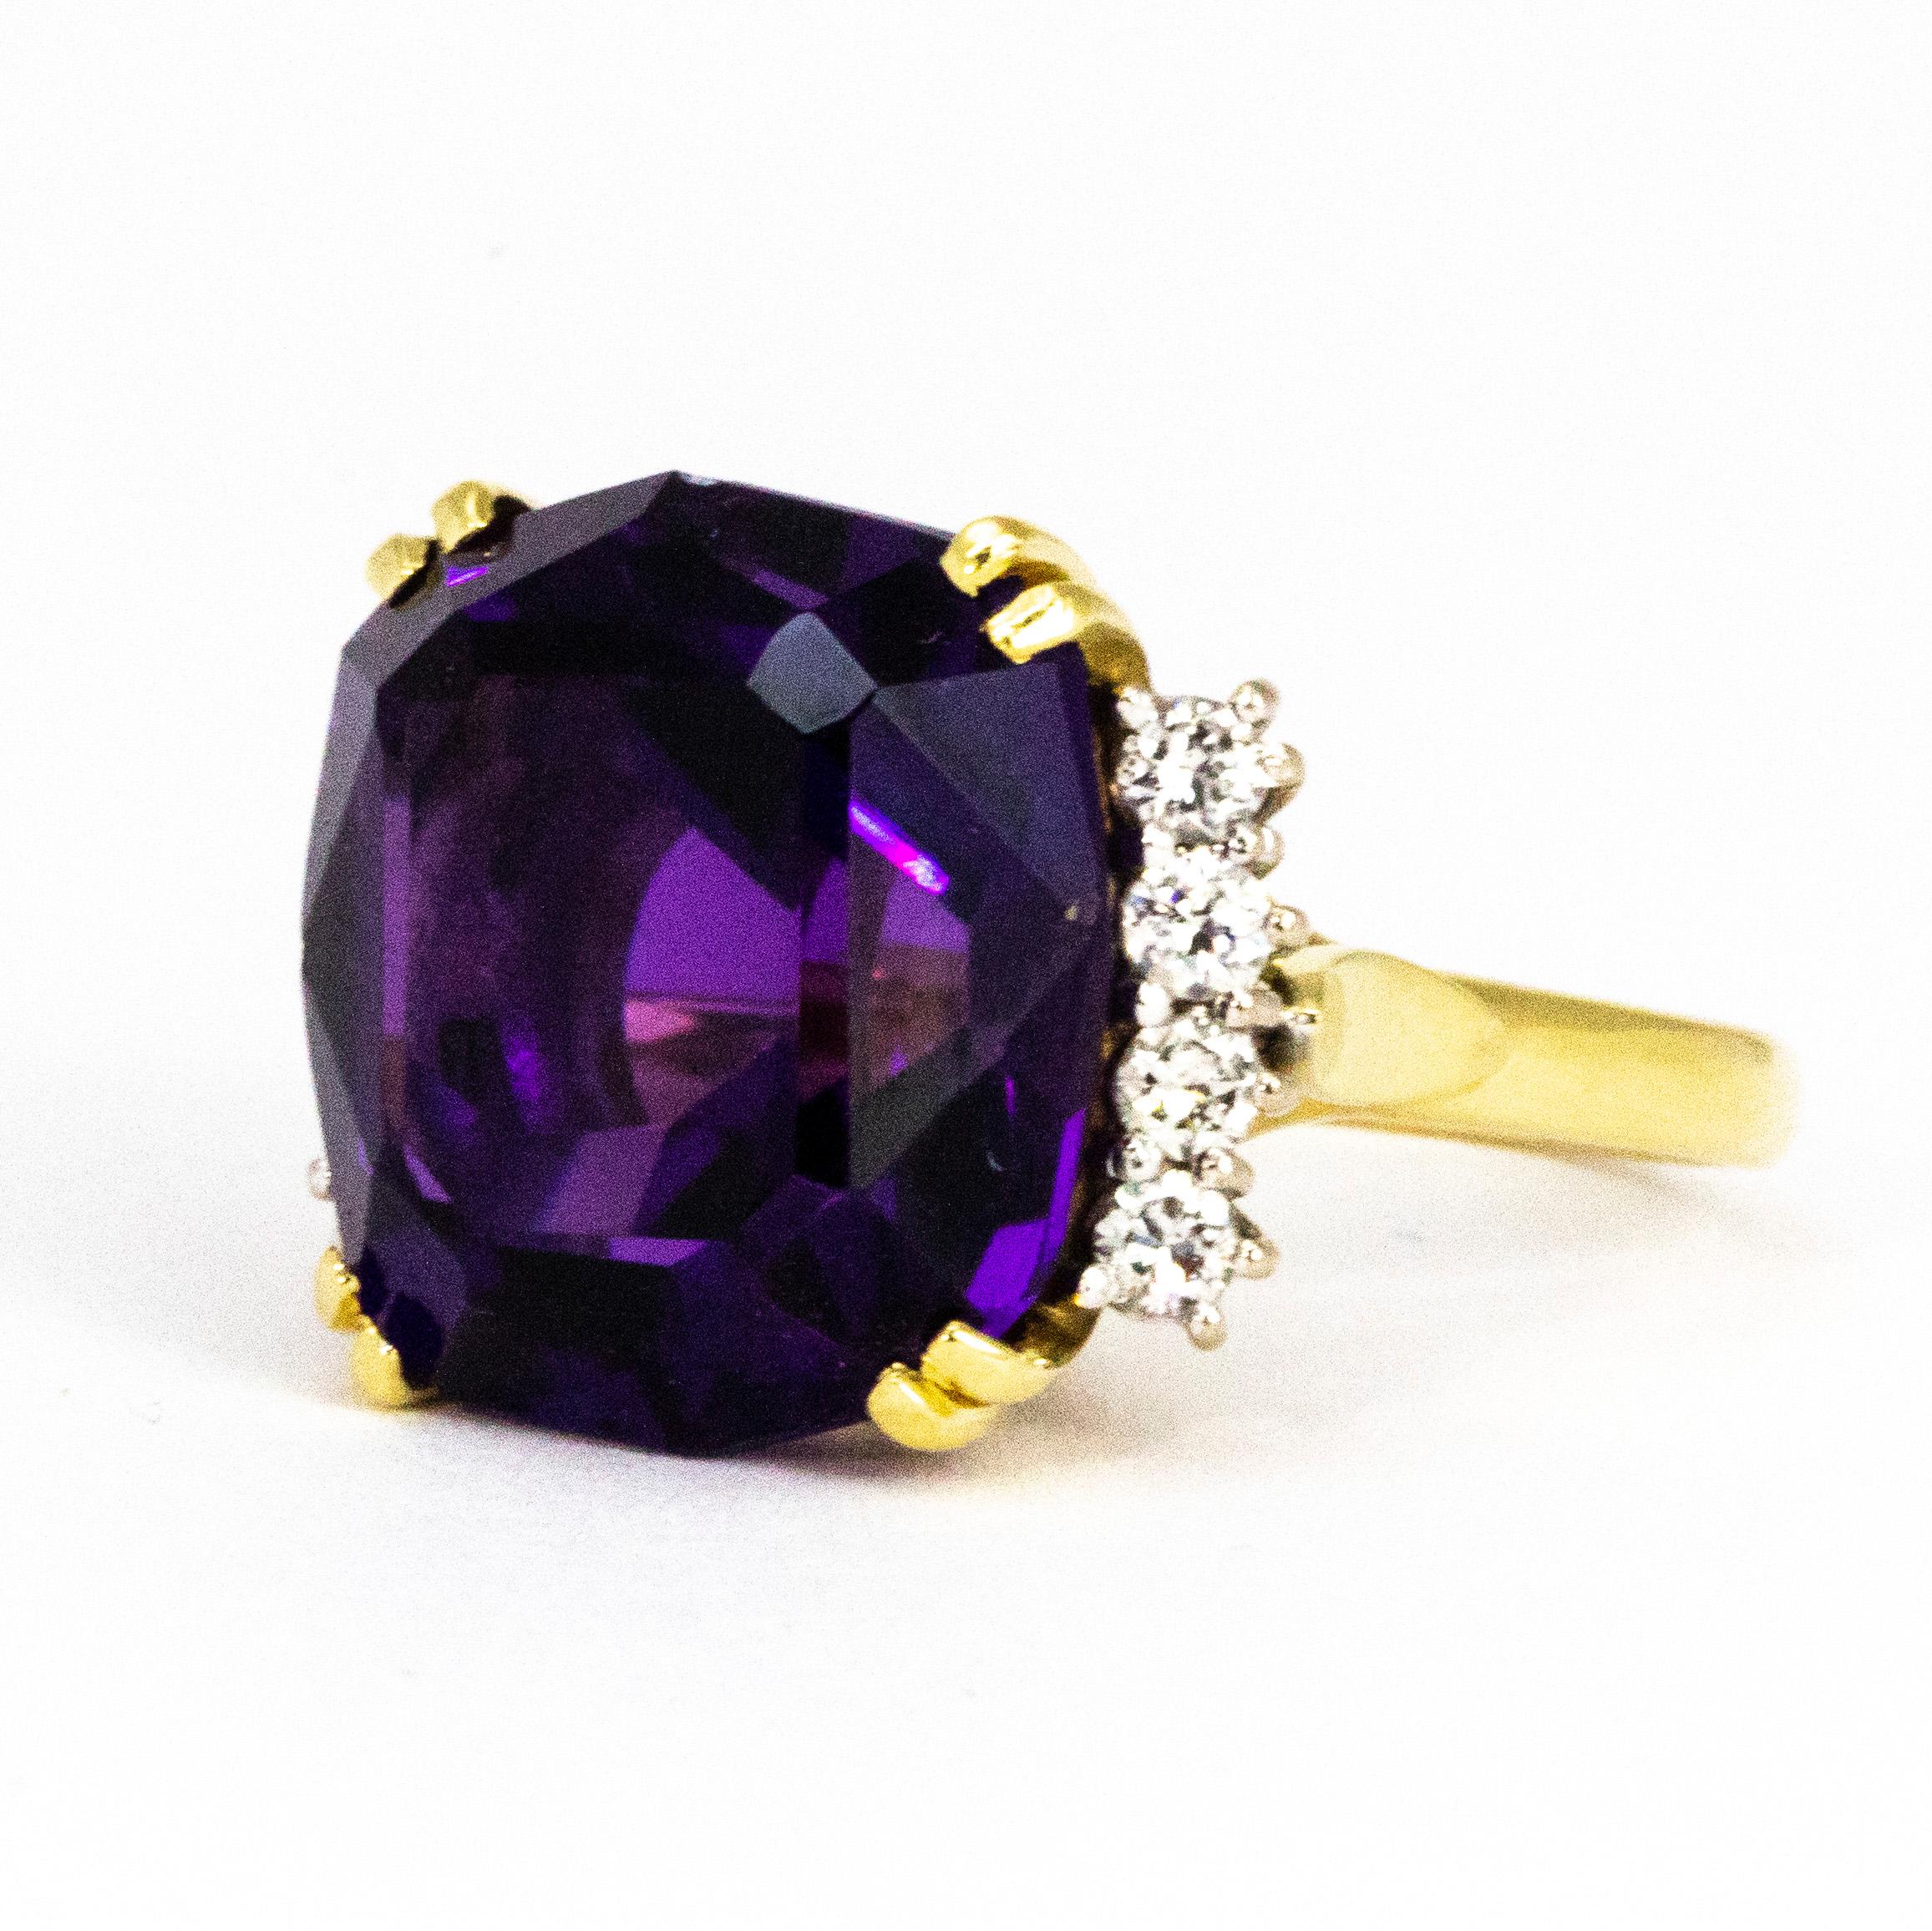 The main attraction of this ring has to be the beautiful deep purple amethyst sat at the centre. The stone measures approximately 20carats and reflects the light beautifully.Either side of the stone there is a fan of round cut diamonds each